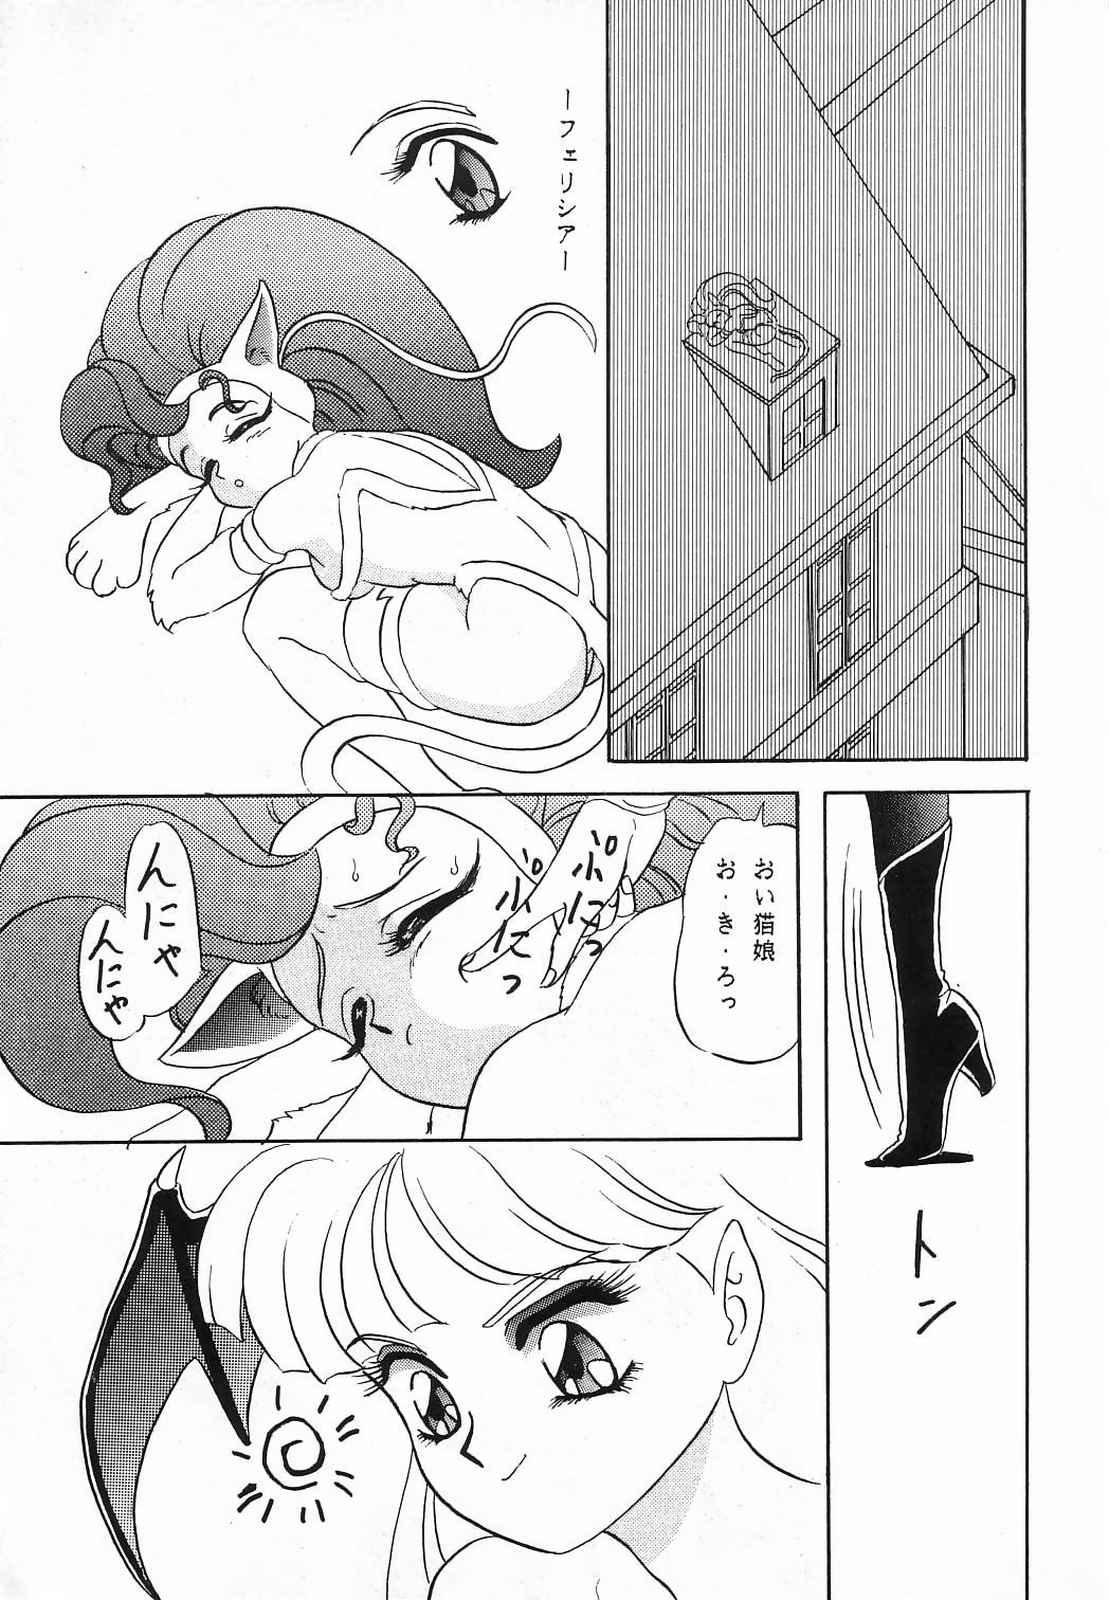 Deflowered Lunch Box 10 - Lunch Time 2 - Sailor moon Darkstalkers Amateur - Page 7